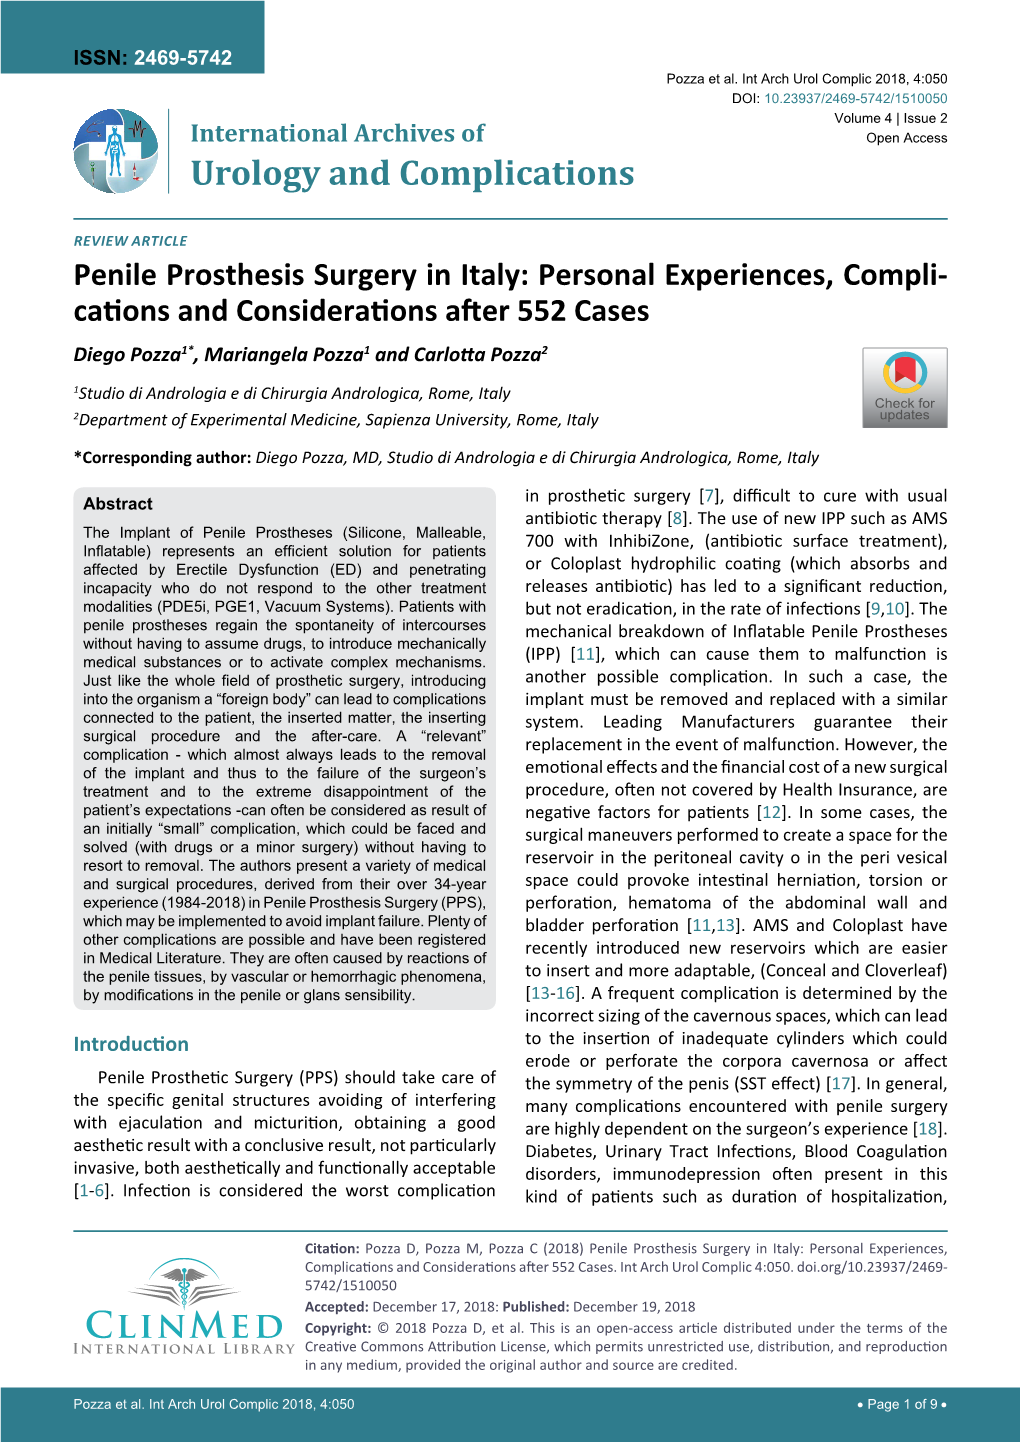 Penile Prosthesis Surgery in Italy: Personal Experiences, Compli- Cations and Considerations After 552 Cases Diego Pozza1*, Mariangela Pozza1 and Carlotta Pozza2